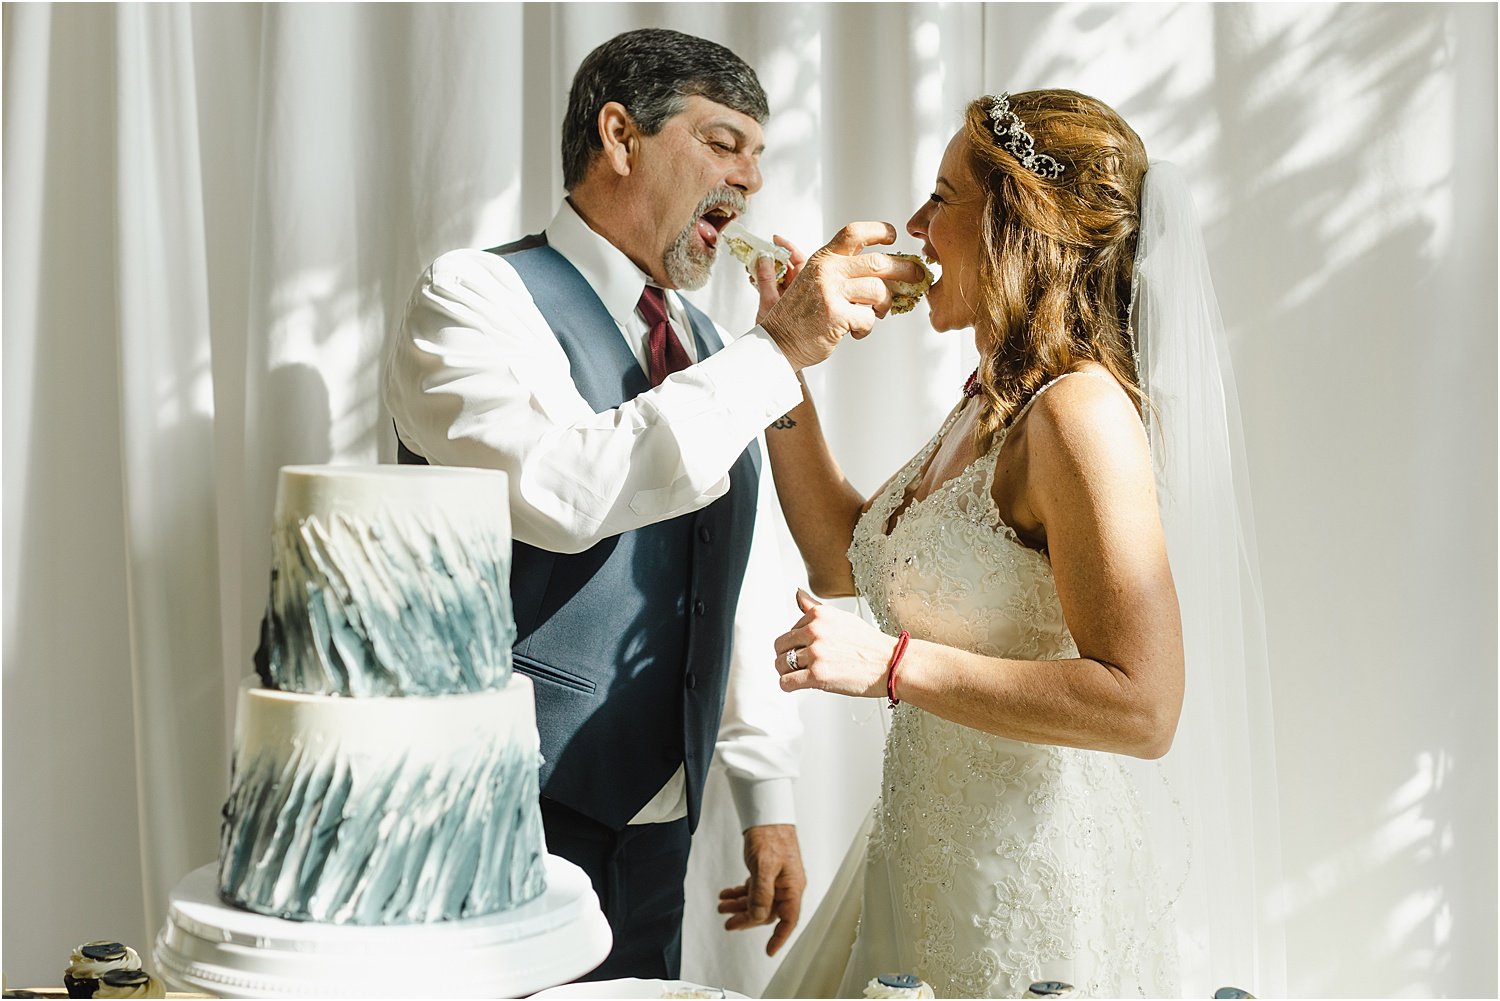 Bride and Groom Feed Each Other Cake